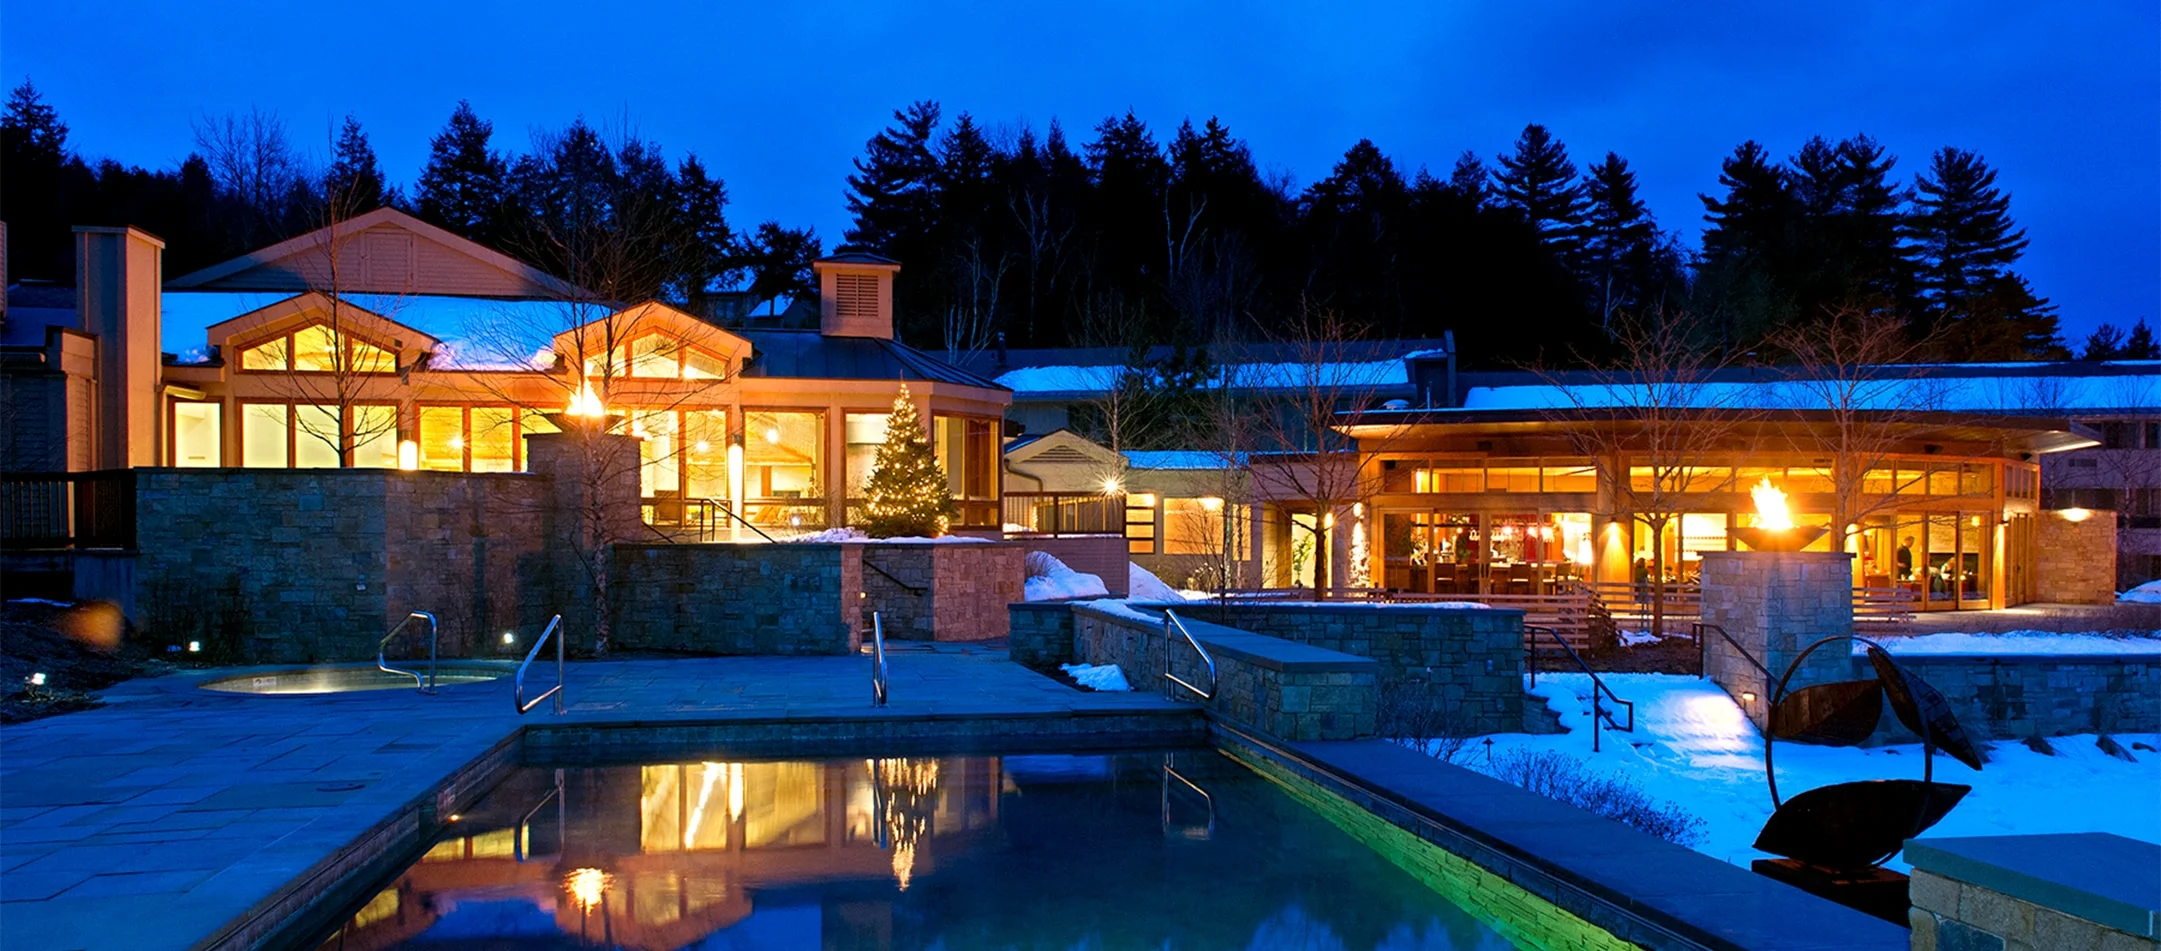 exterior view of Topnotch Resort Stowe